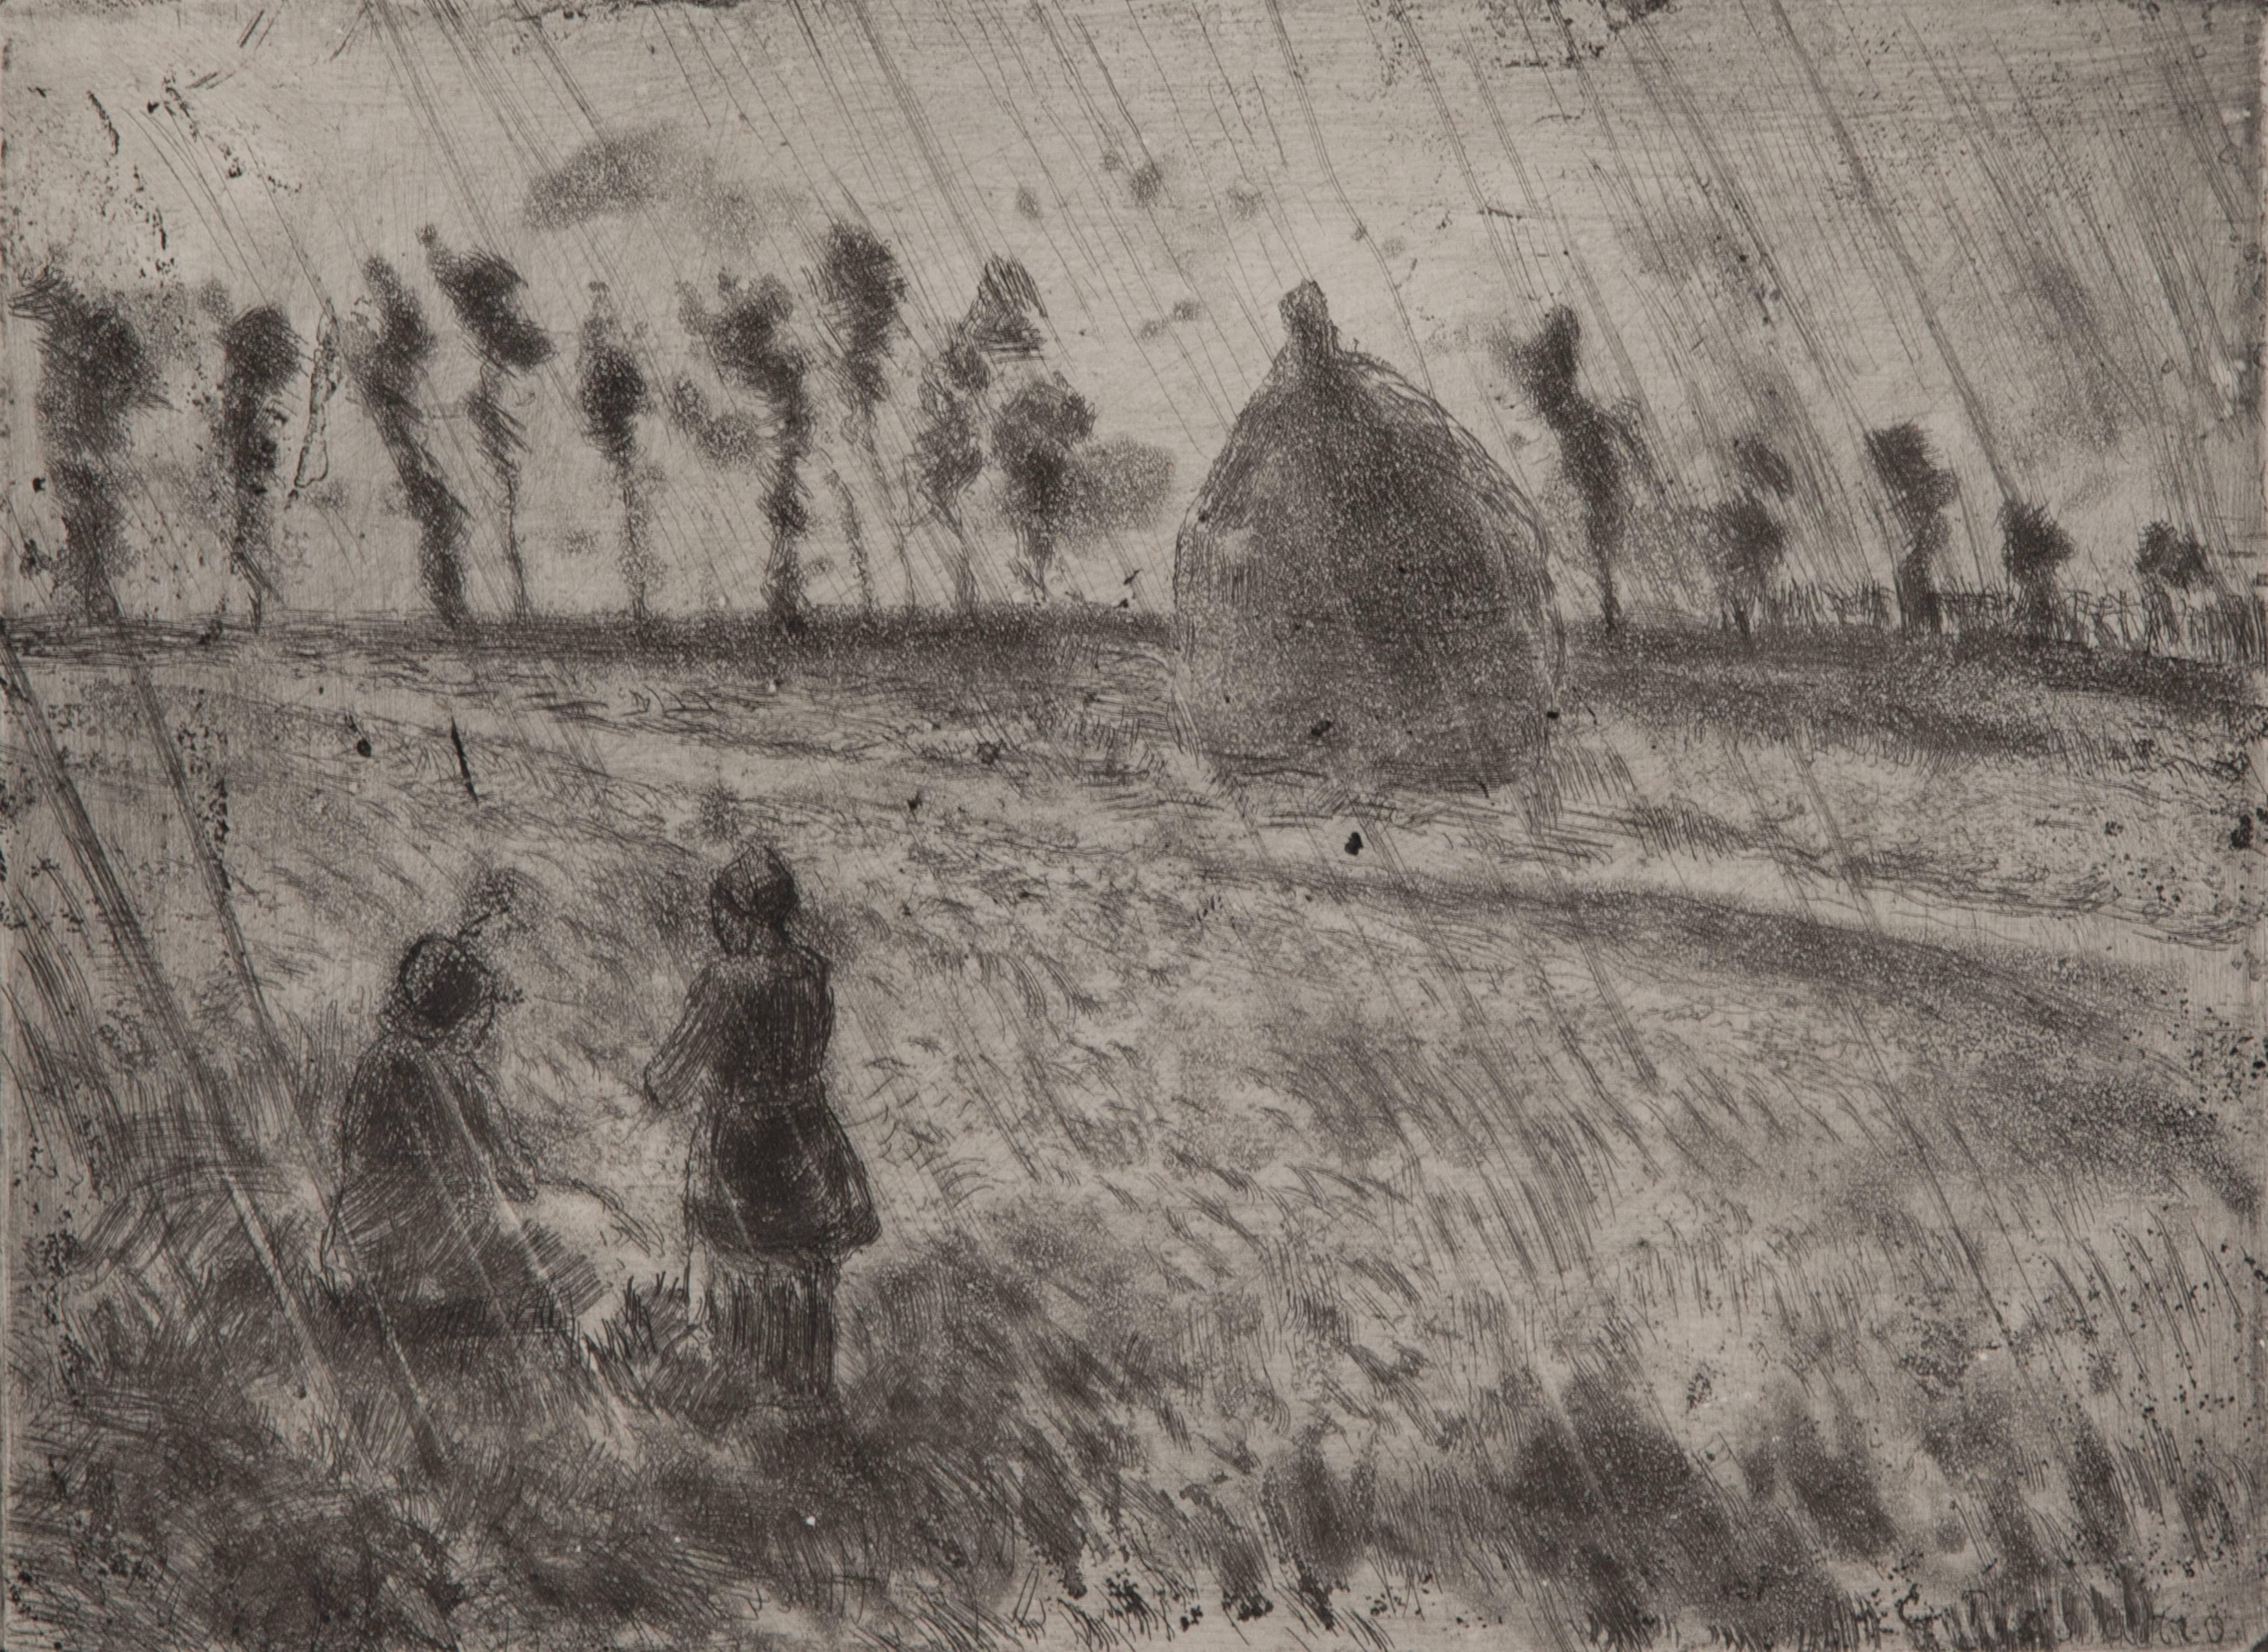 Effet de pluie by Camille Pissarro (1830-1903)
Etching, aquatint and drypoint
15.9 x 21.3 cm (6 ¹/₄ x 8 ³/₈ inches)
Stamped with initials C.P. lower left and numbered 7/14 lower right

Literature: 
Loys Delteil, Alan Hyman, Jean Cailac, Camille